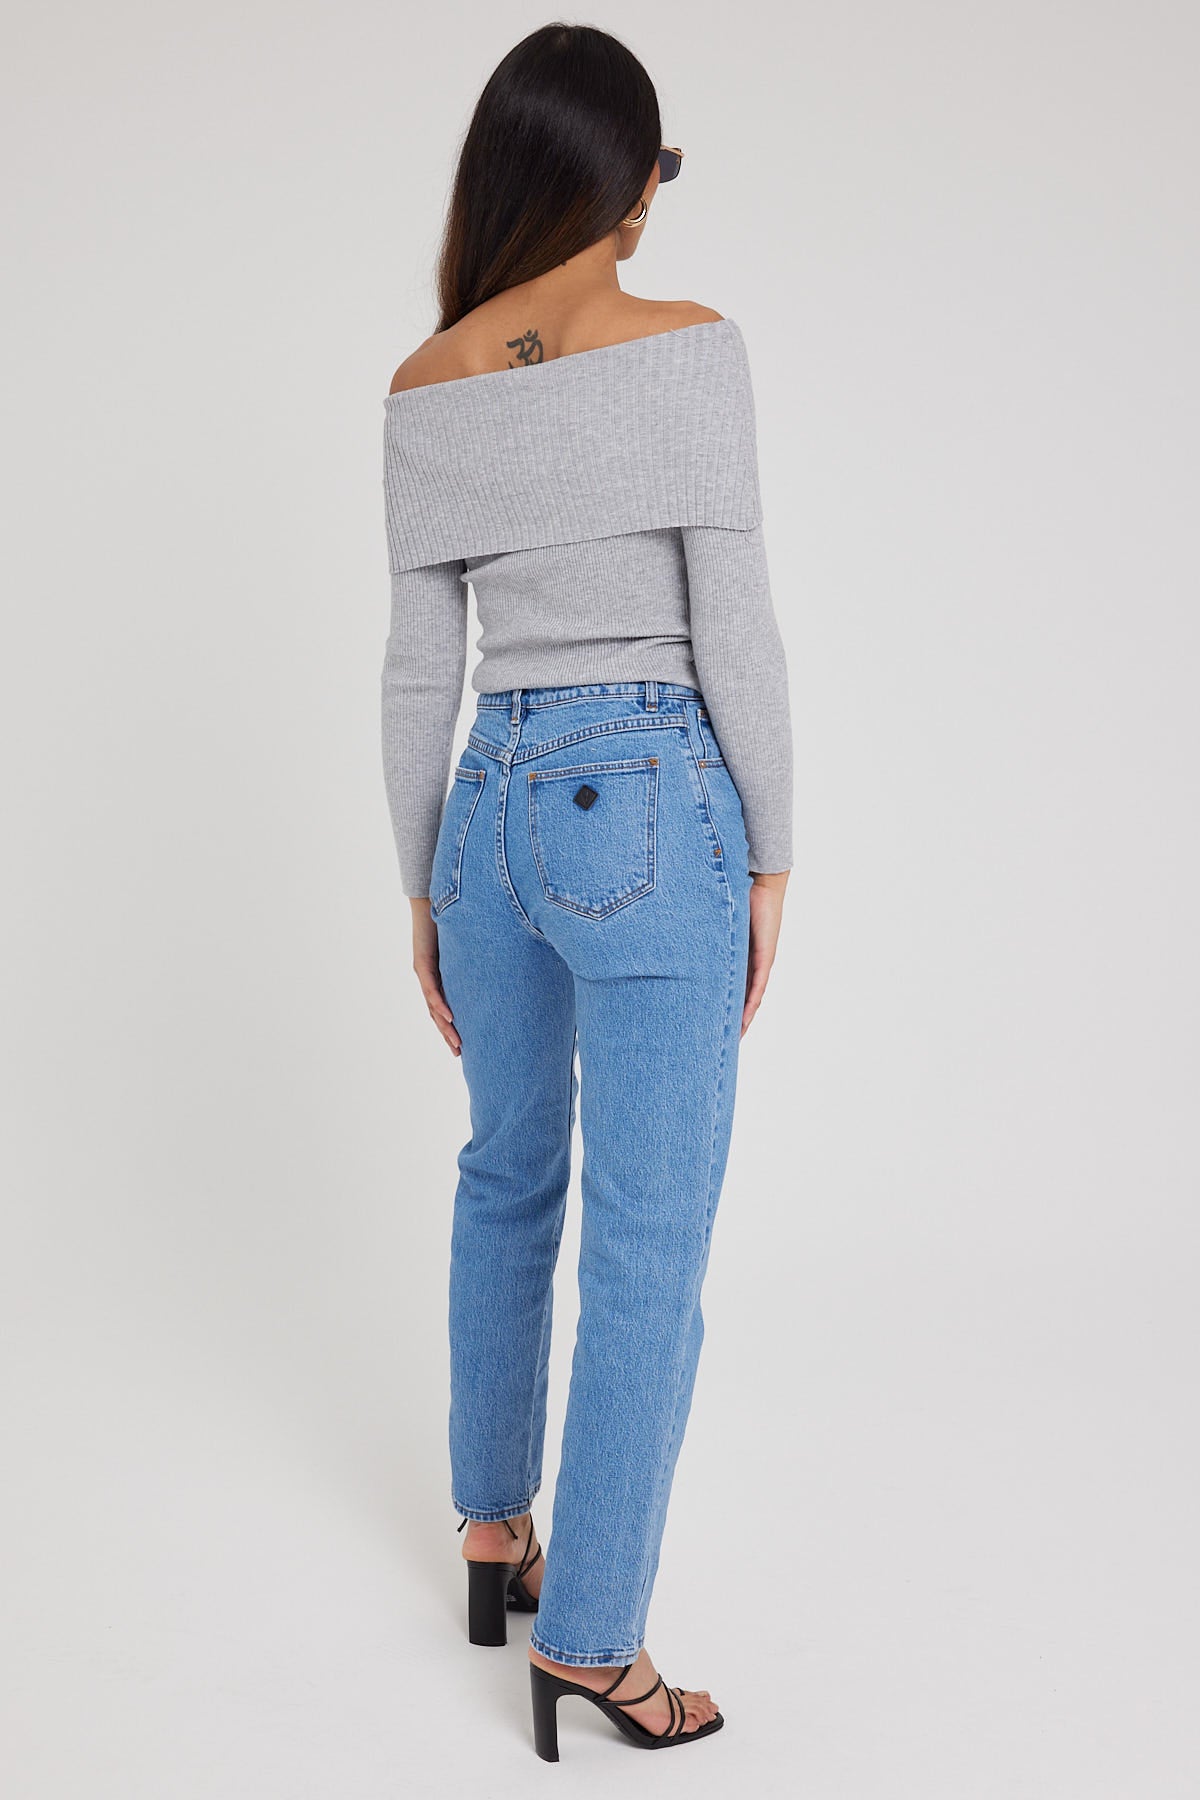 Abrand 94 High Waisted Straight Jean Parker Organic